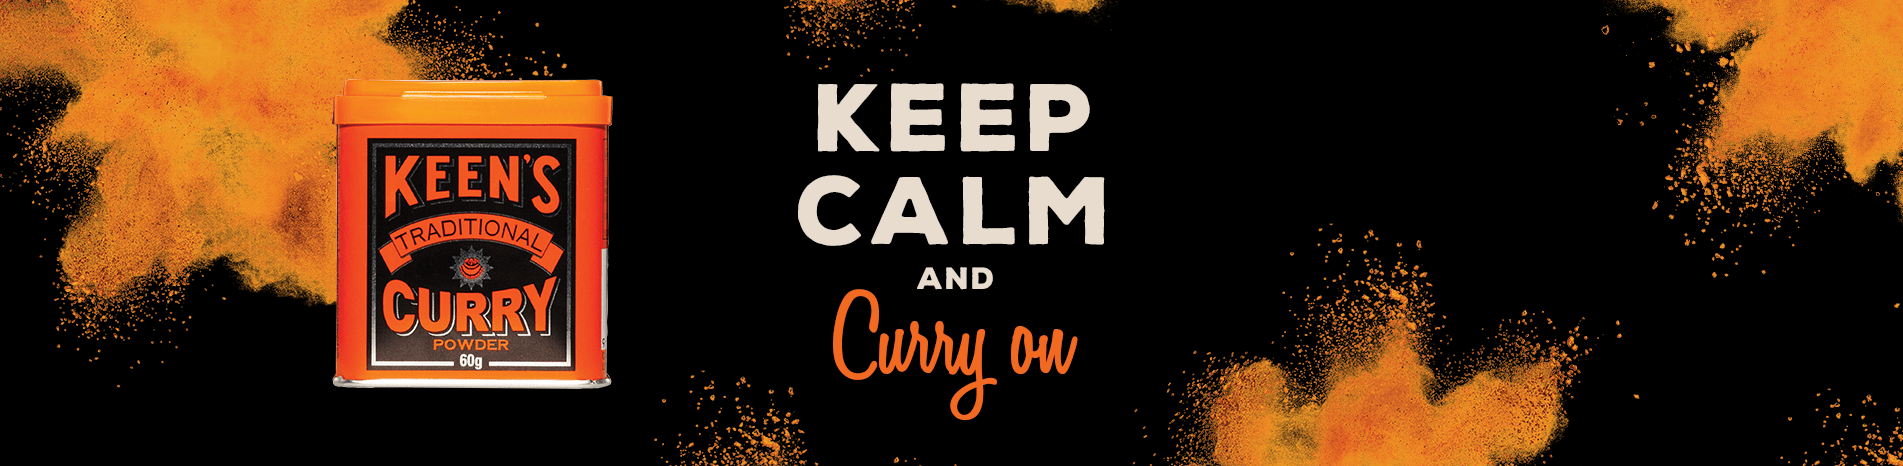 Keep-Calm-and-Curry-On-banner